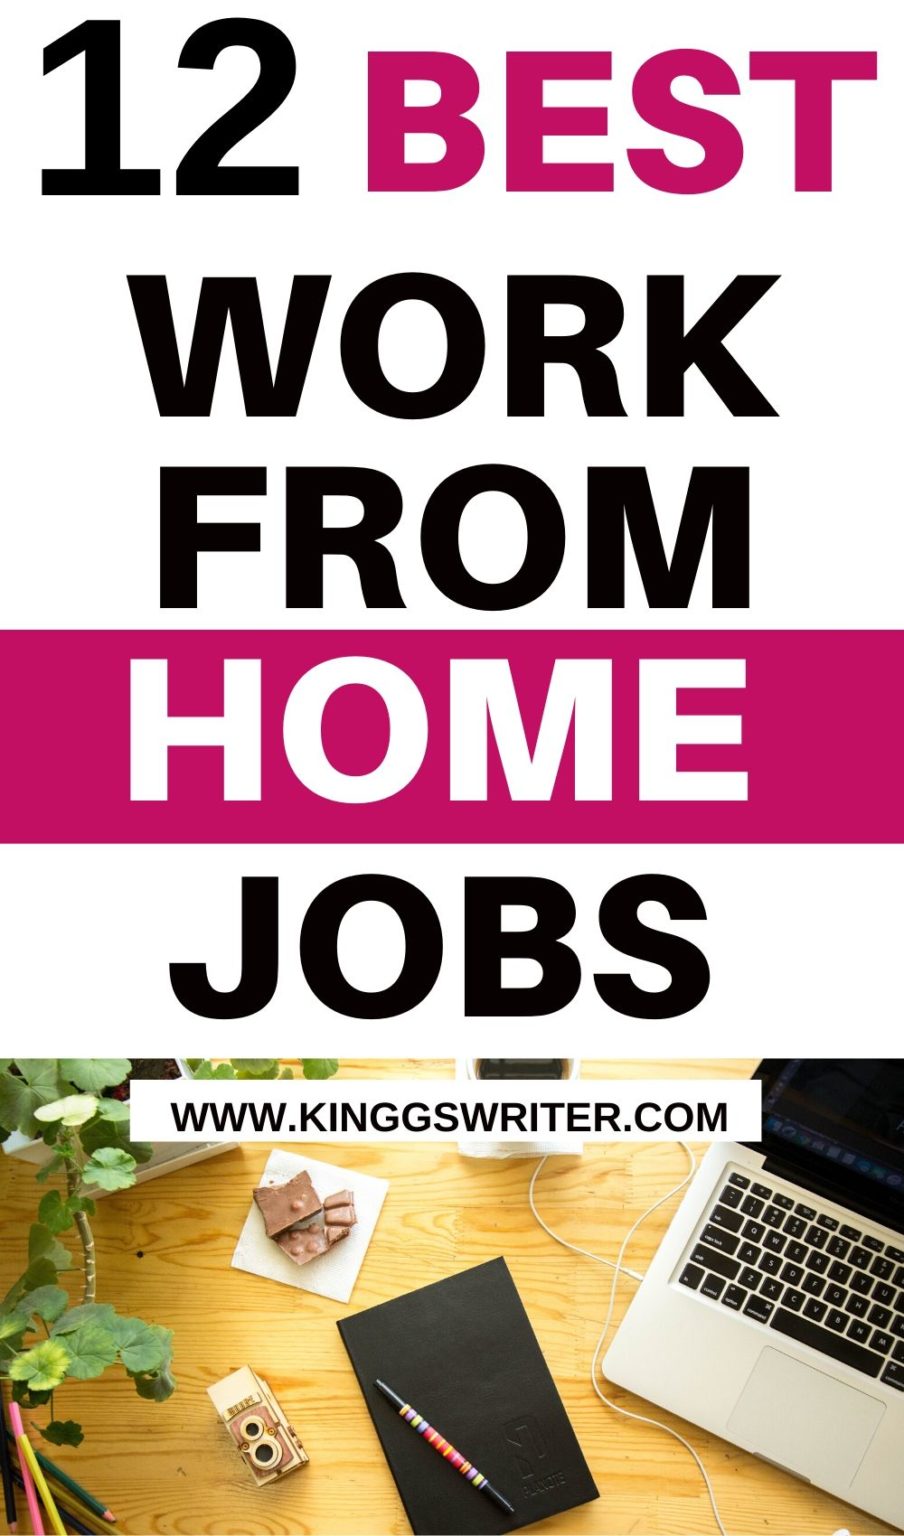 12 Best Work from Home Jobs for 2020 Kinggs Writer